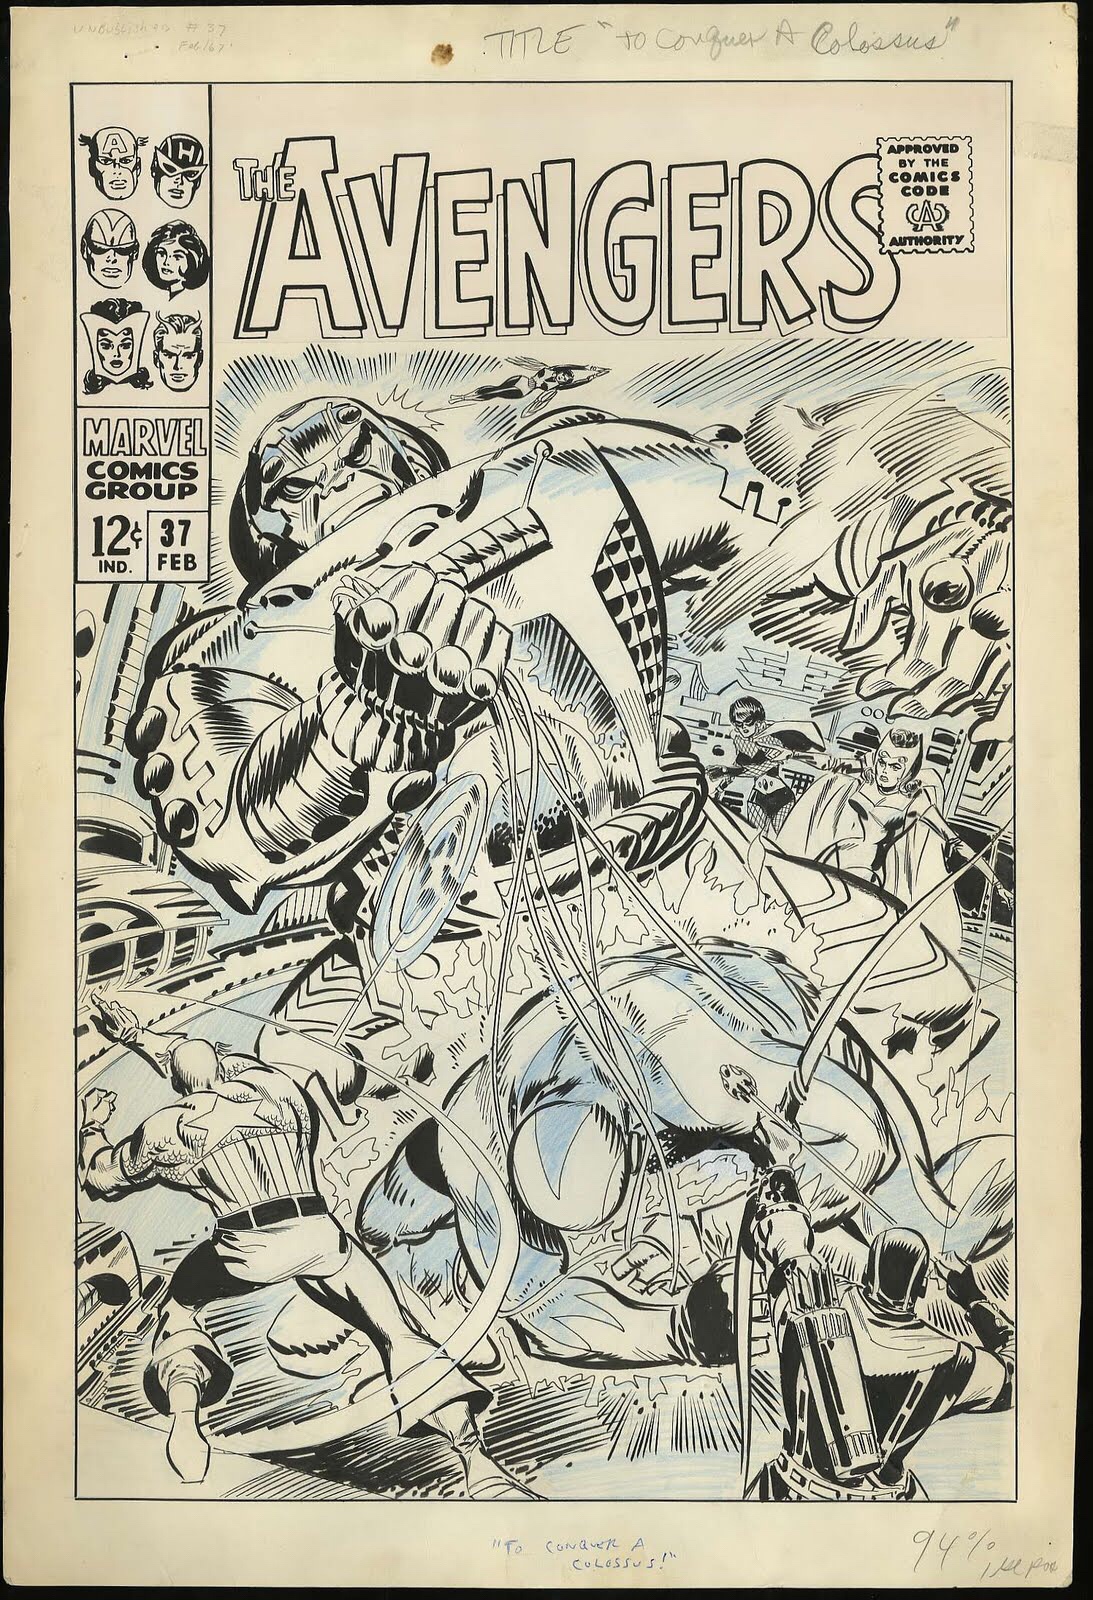 The cover of The Avengers #37